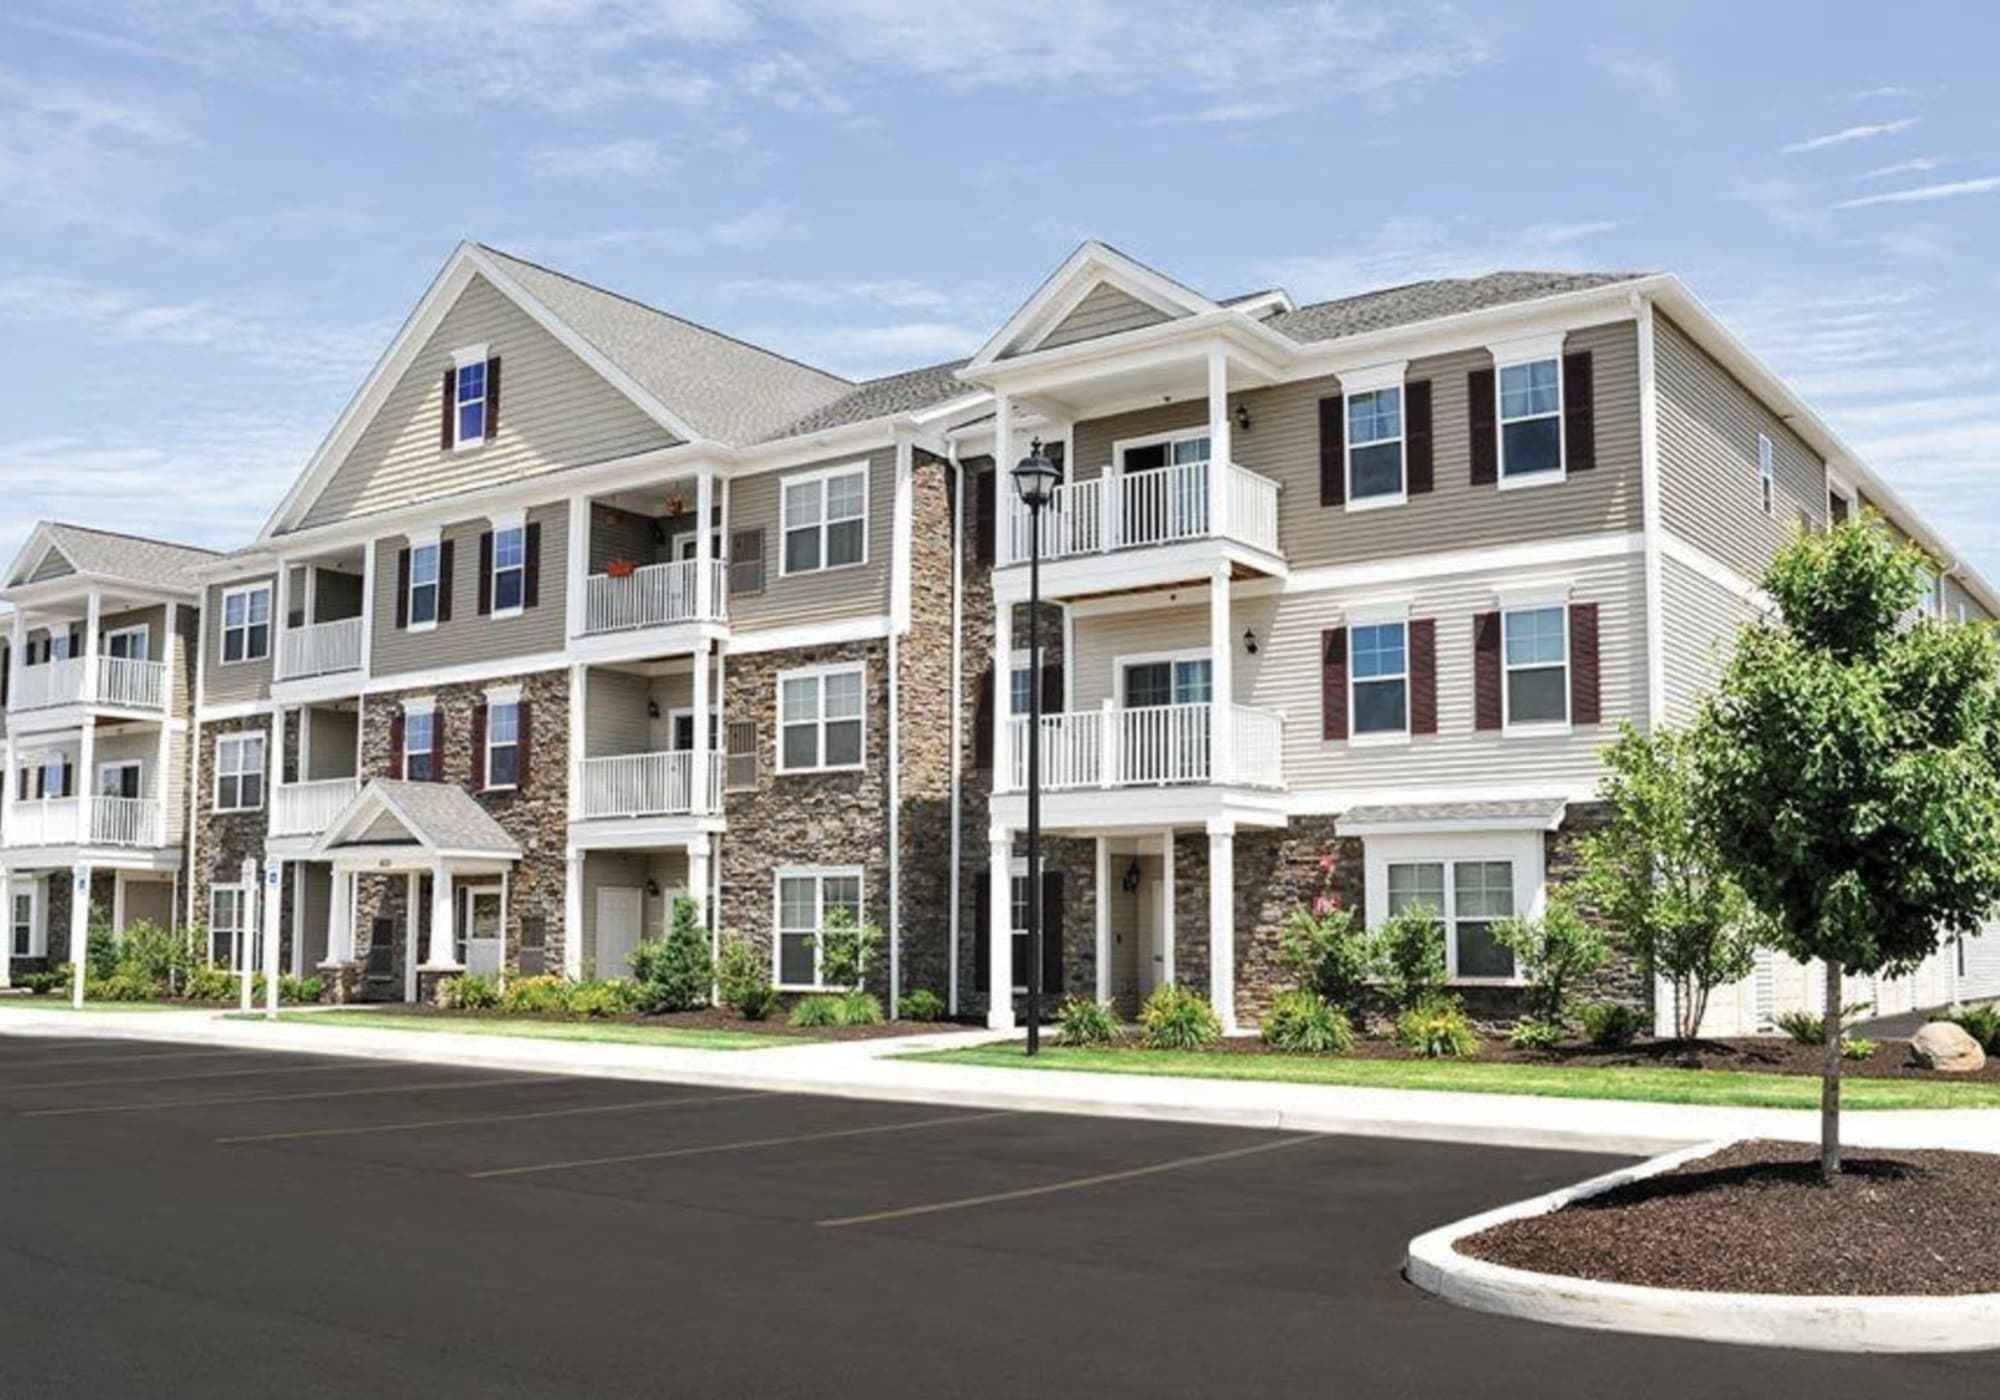 Rivers pointe apartments in Liverpool, New York